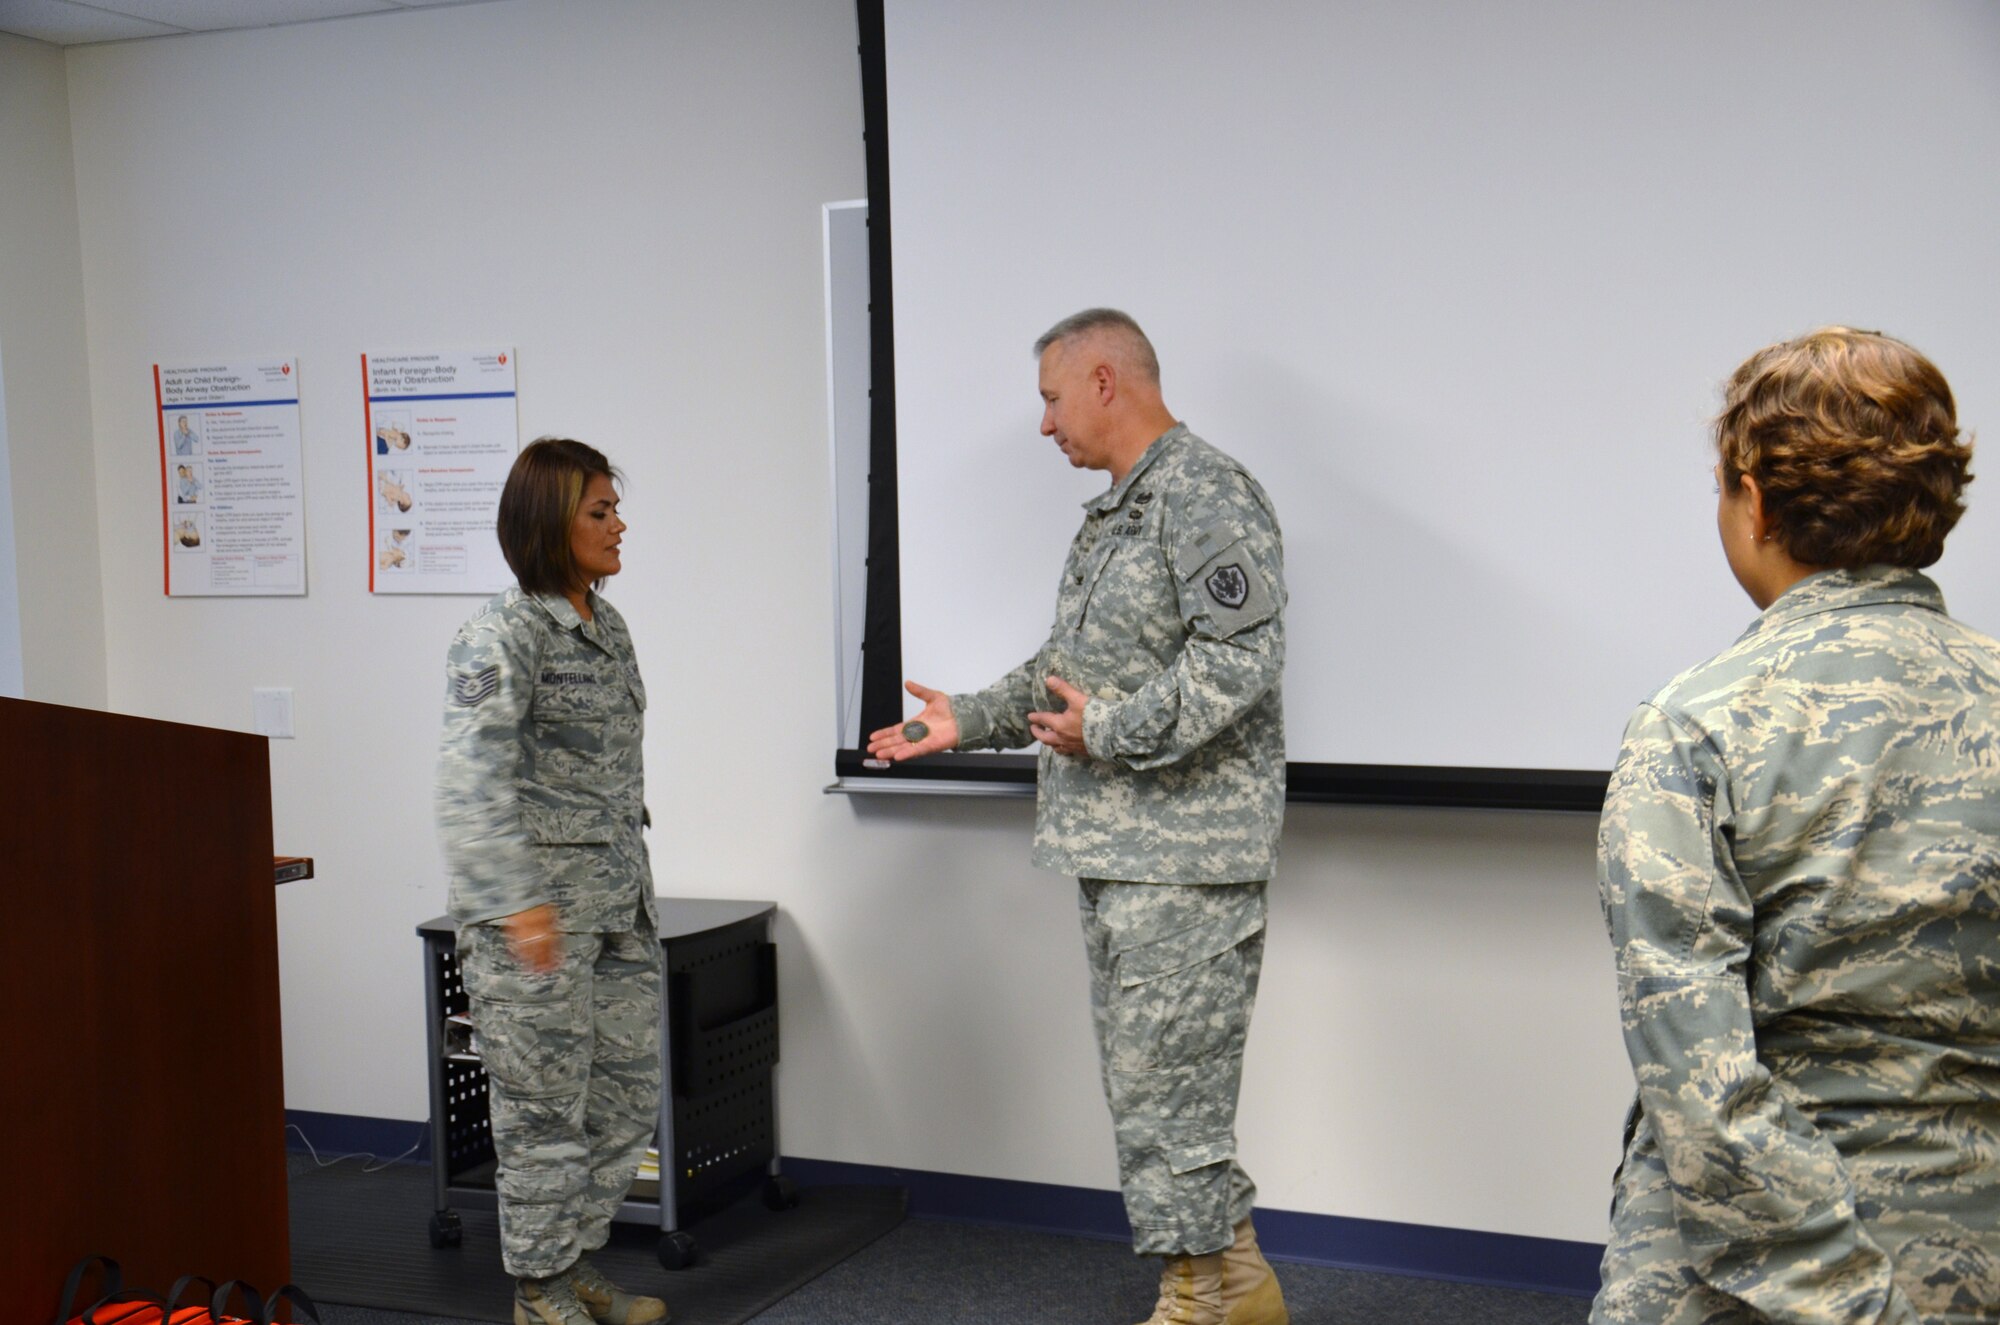 Tech Sgt. Valerie Montellano, instructor supervisor for the Air Force dental assistant program at the Medical Education and Training Campus, is surprised by Army Col. Robert Bridgford, vice commander of the 502nd Air Base Wing, while teaching a Basic Lifesaving class on Aug. 23.

Bridgford described to the class how Montellano’s training and quick thinking saved his life. He then presented Montellano with a coin while his wife, Shirley, presented her with a bouquet of flowers in appreciation for her actions that “brought him back to life”.

Bridgford collapsed while working out at the Jimmy Brought Fitness Center May 14. Montellano, along with a nurse with the AMEDDC&S Department of Nursing, immediately sprang into action and administered life support with an automated external defibrillator for approximately 15 minutes until emergency medical services arrived. According to Bridgford, if lifesaving measures were not performed within the first two minutes, he would not have survived.